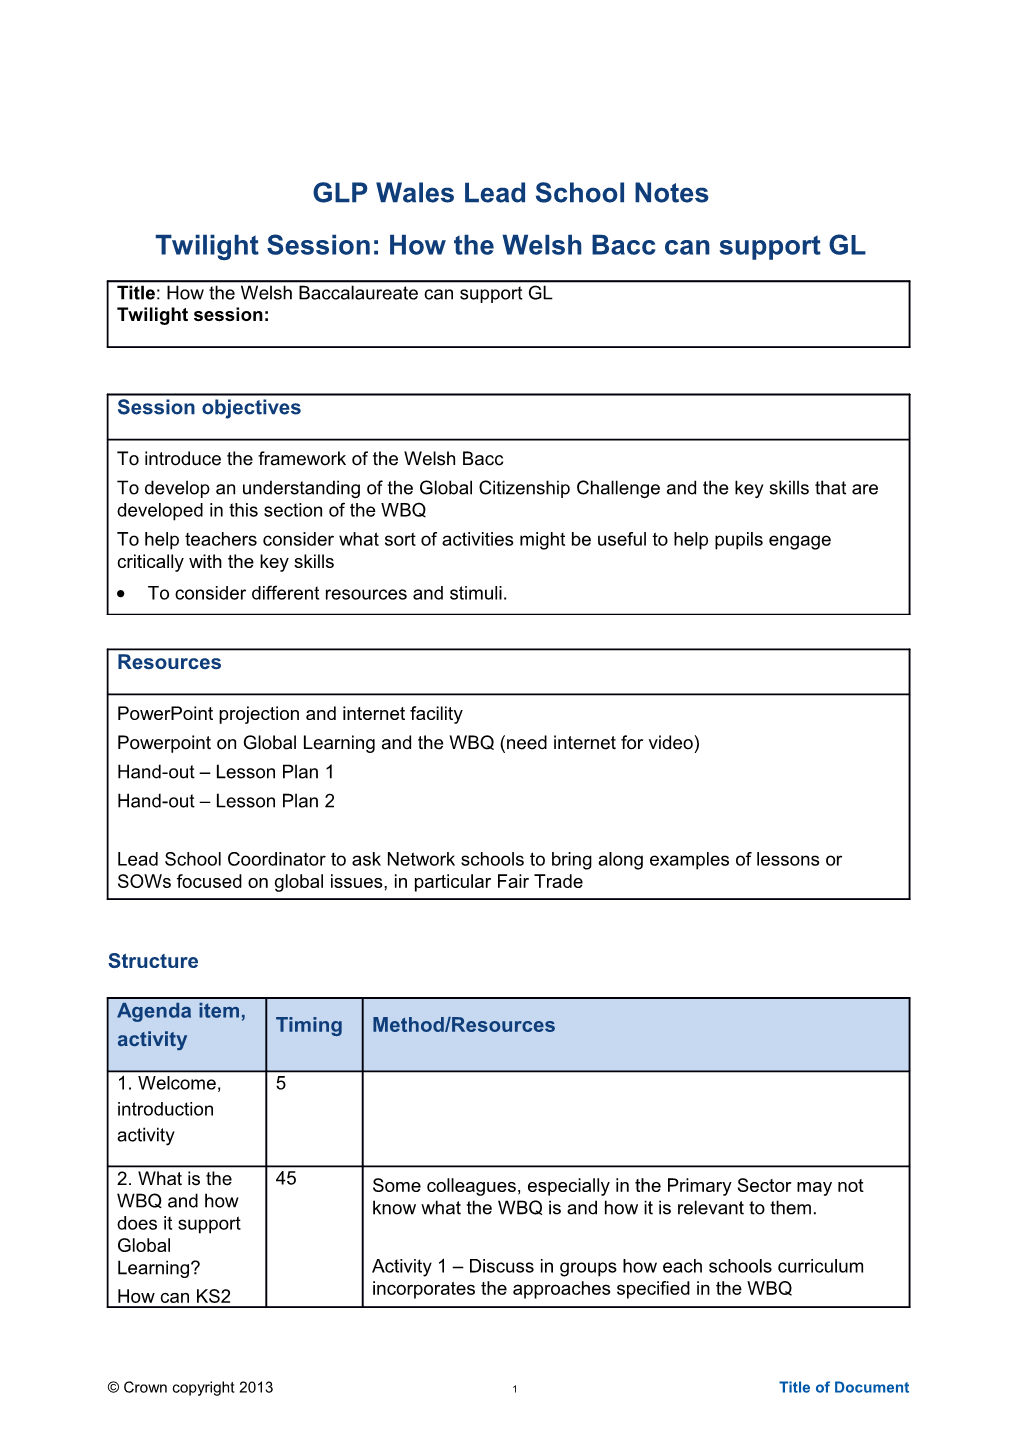 Twilight Session: How the Welsh Bacc Can Support GL